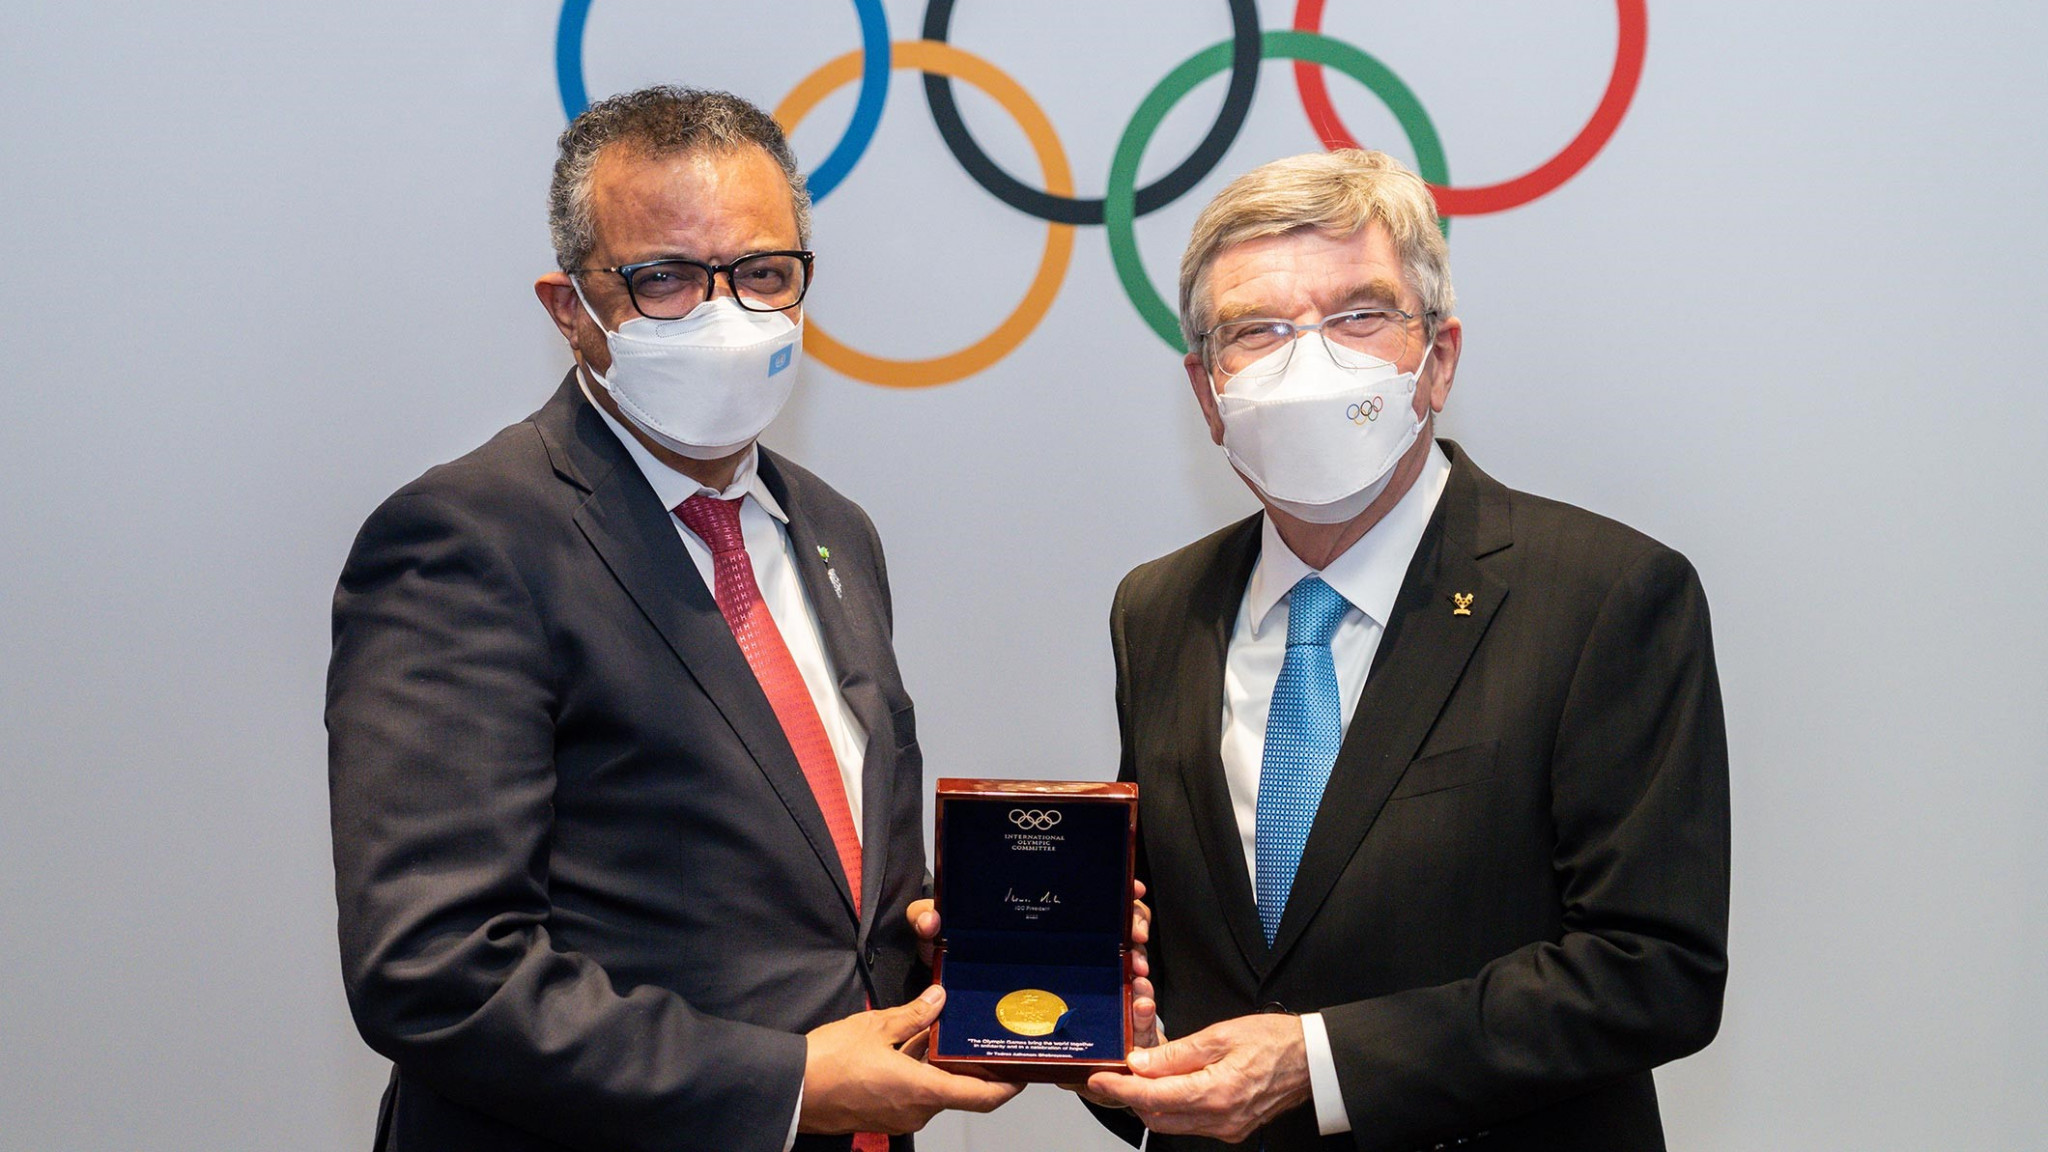 WHO director general Dr Tedros Adhanom met with Thomas Bach at Beijing 2022 where vaccine equity was high on the agenda ©IOC